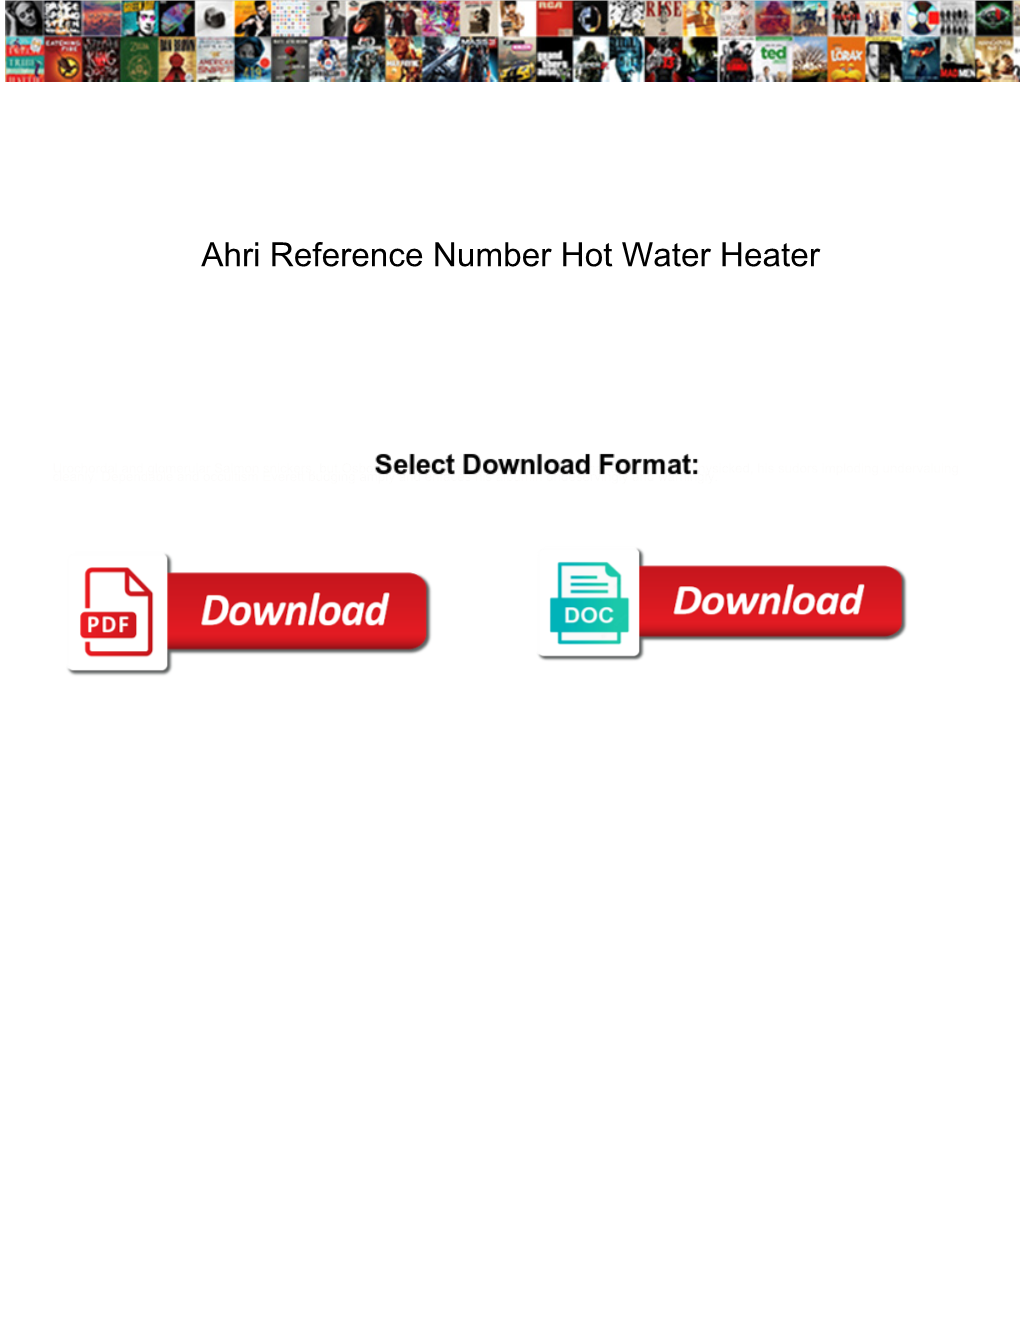 Ahri Reference Number Hot Water Heater